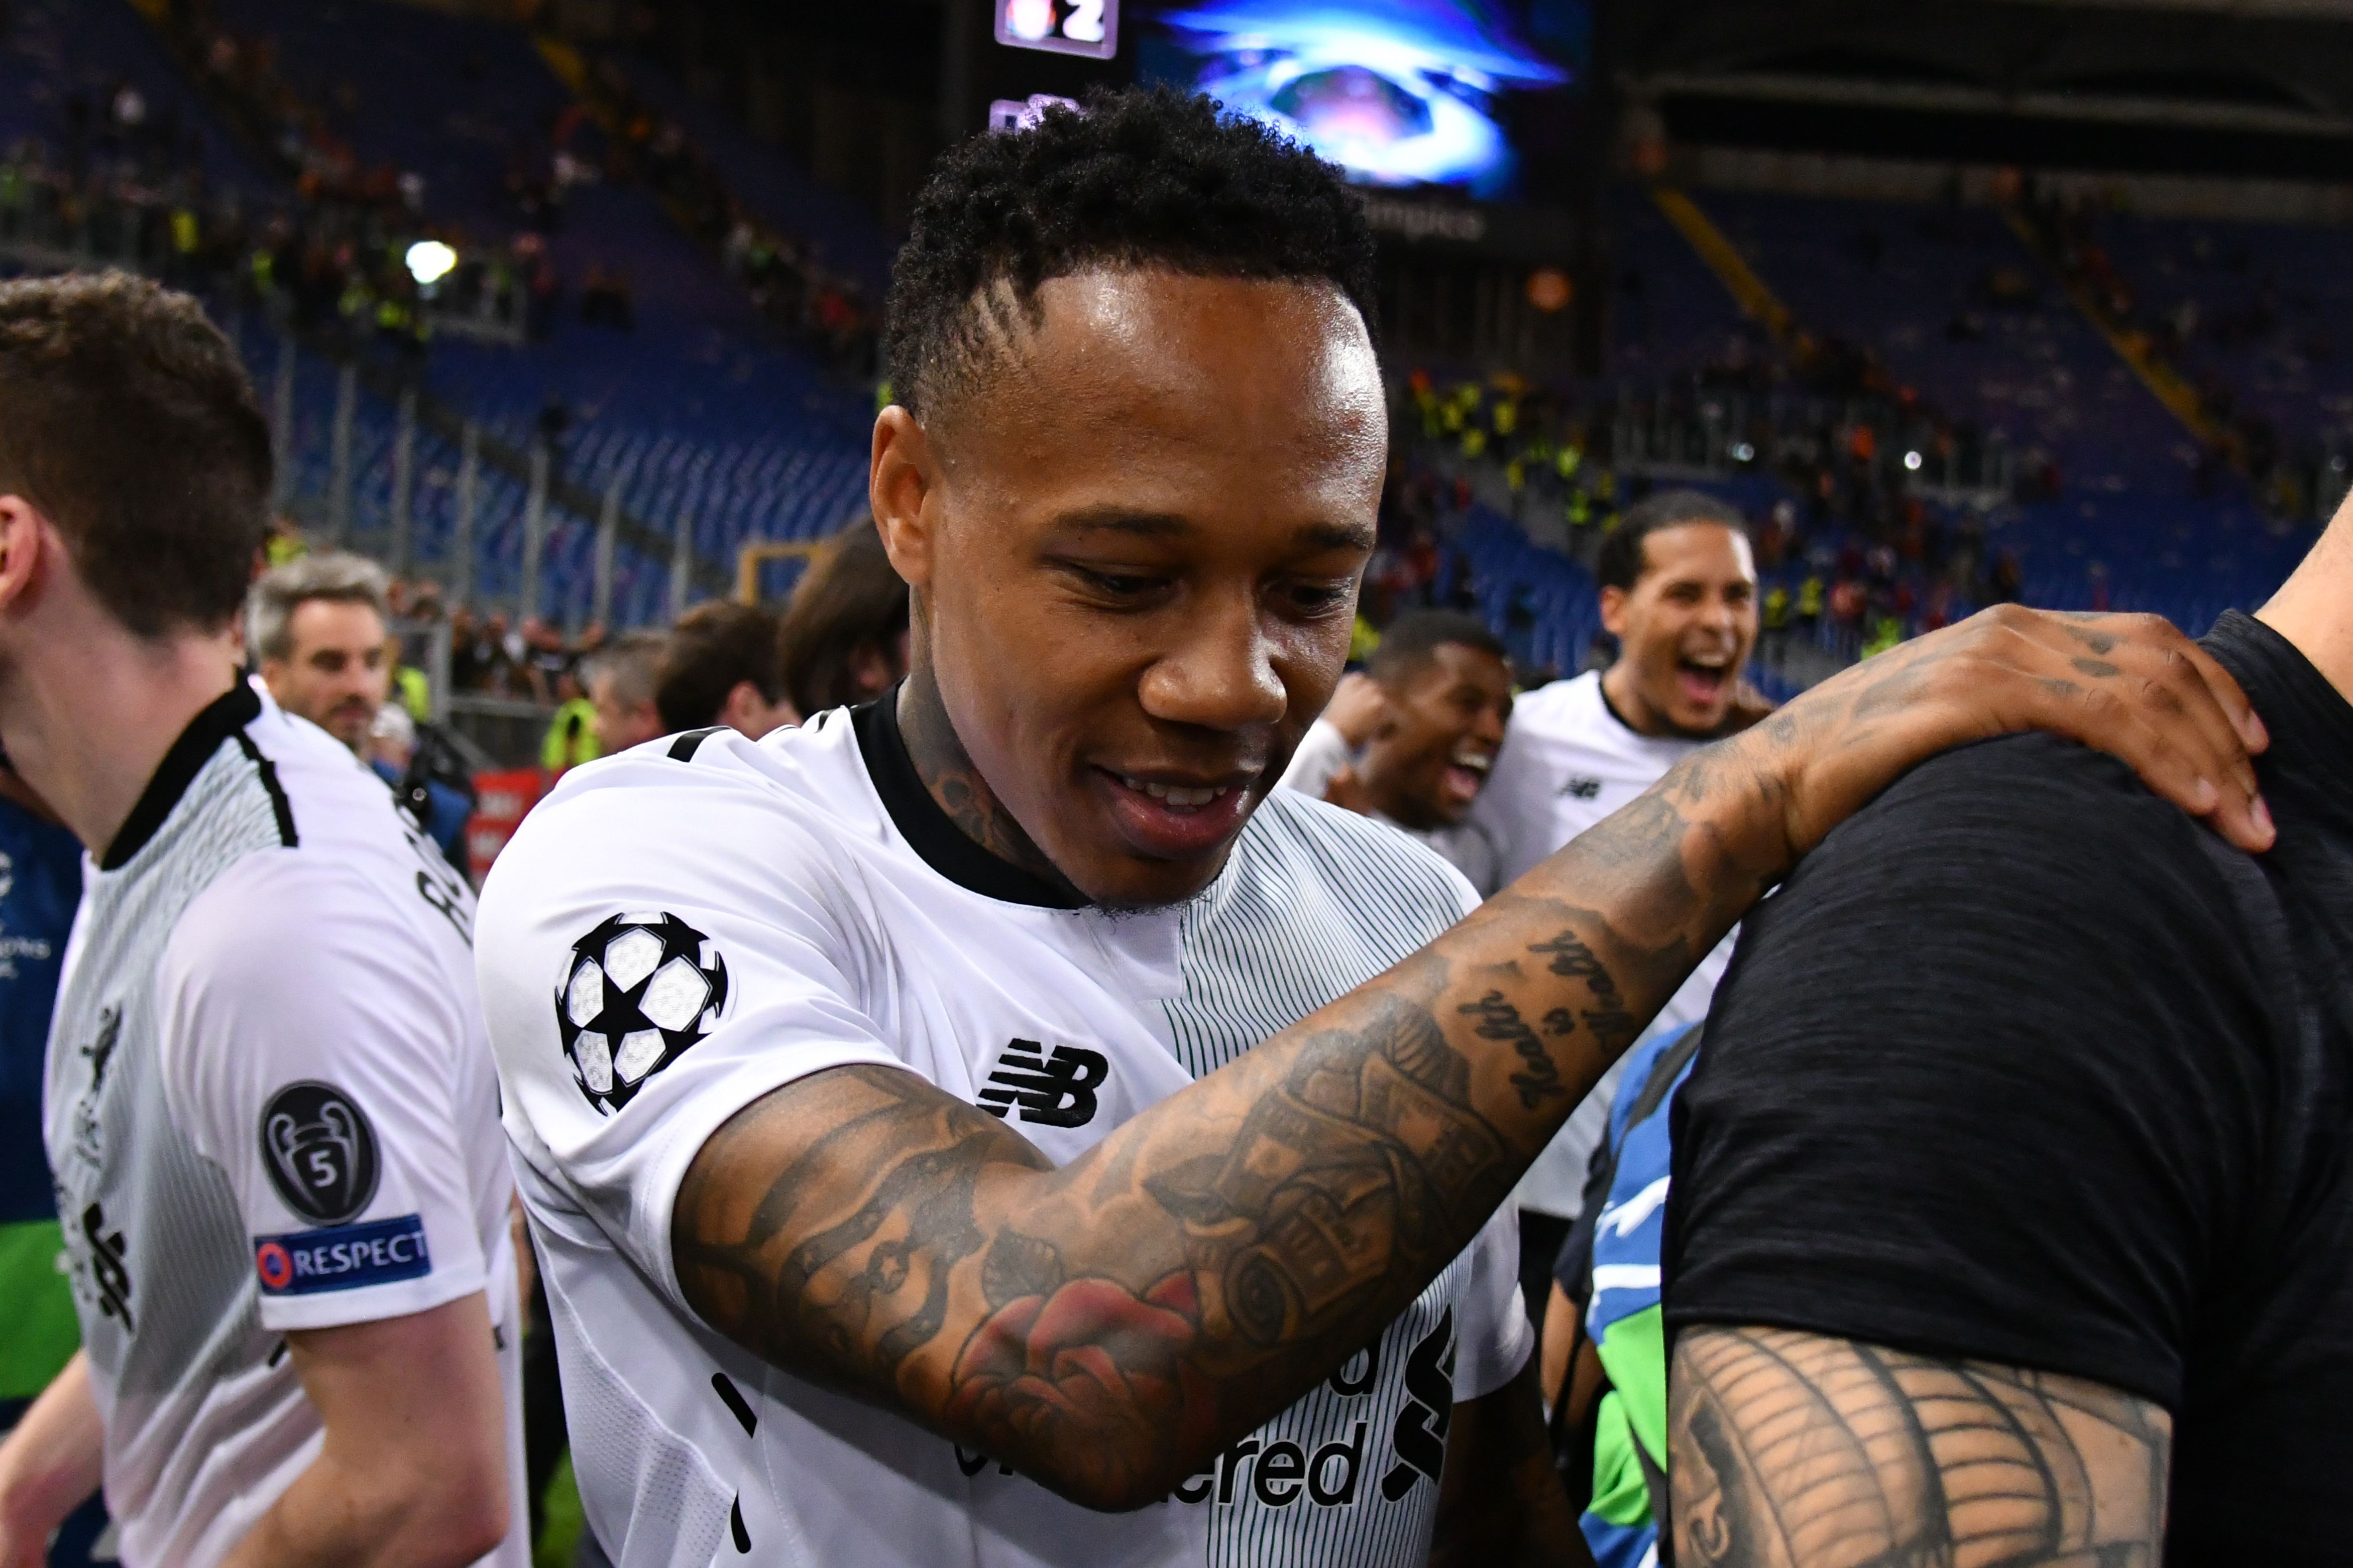 Liverpool's English defender Nathaniel Clyne celebrates their victory at the end of the UEFA Champions League semi-final second leg football match AS Roma vs Liverpool FC at the Stadio Olimpico in Rome on May 2, 2018. (Photo by Alberto PIZZOLI / AFP)        (Photo credit should read ALBERTO PIZZOLI/AFP/Getty Images)